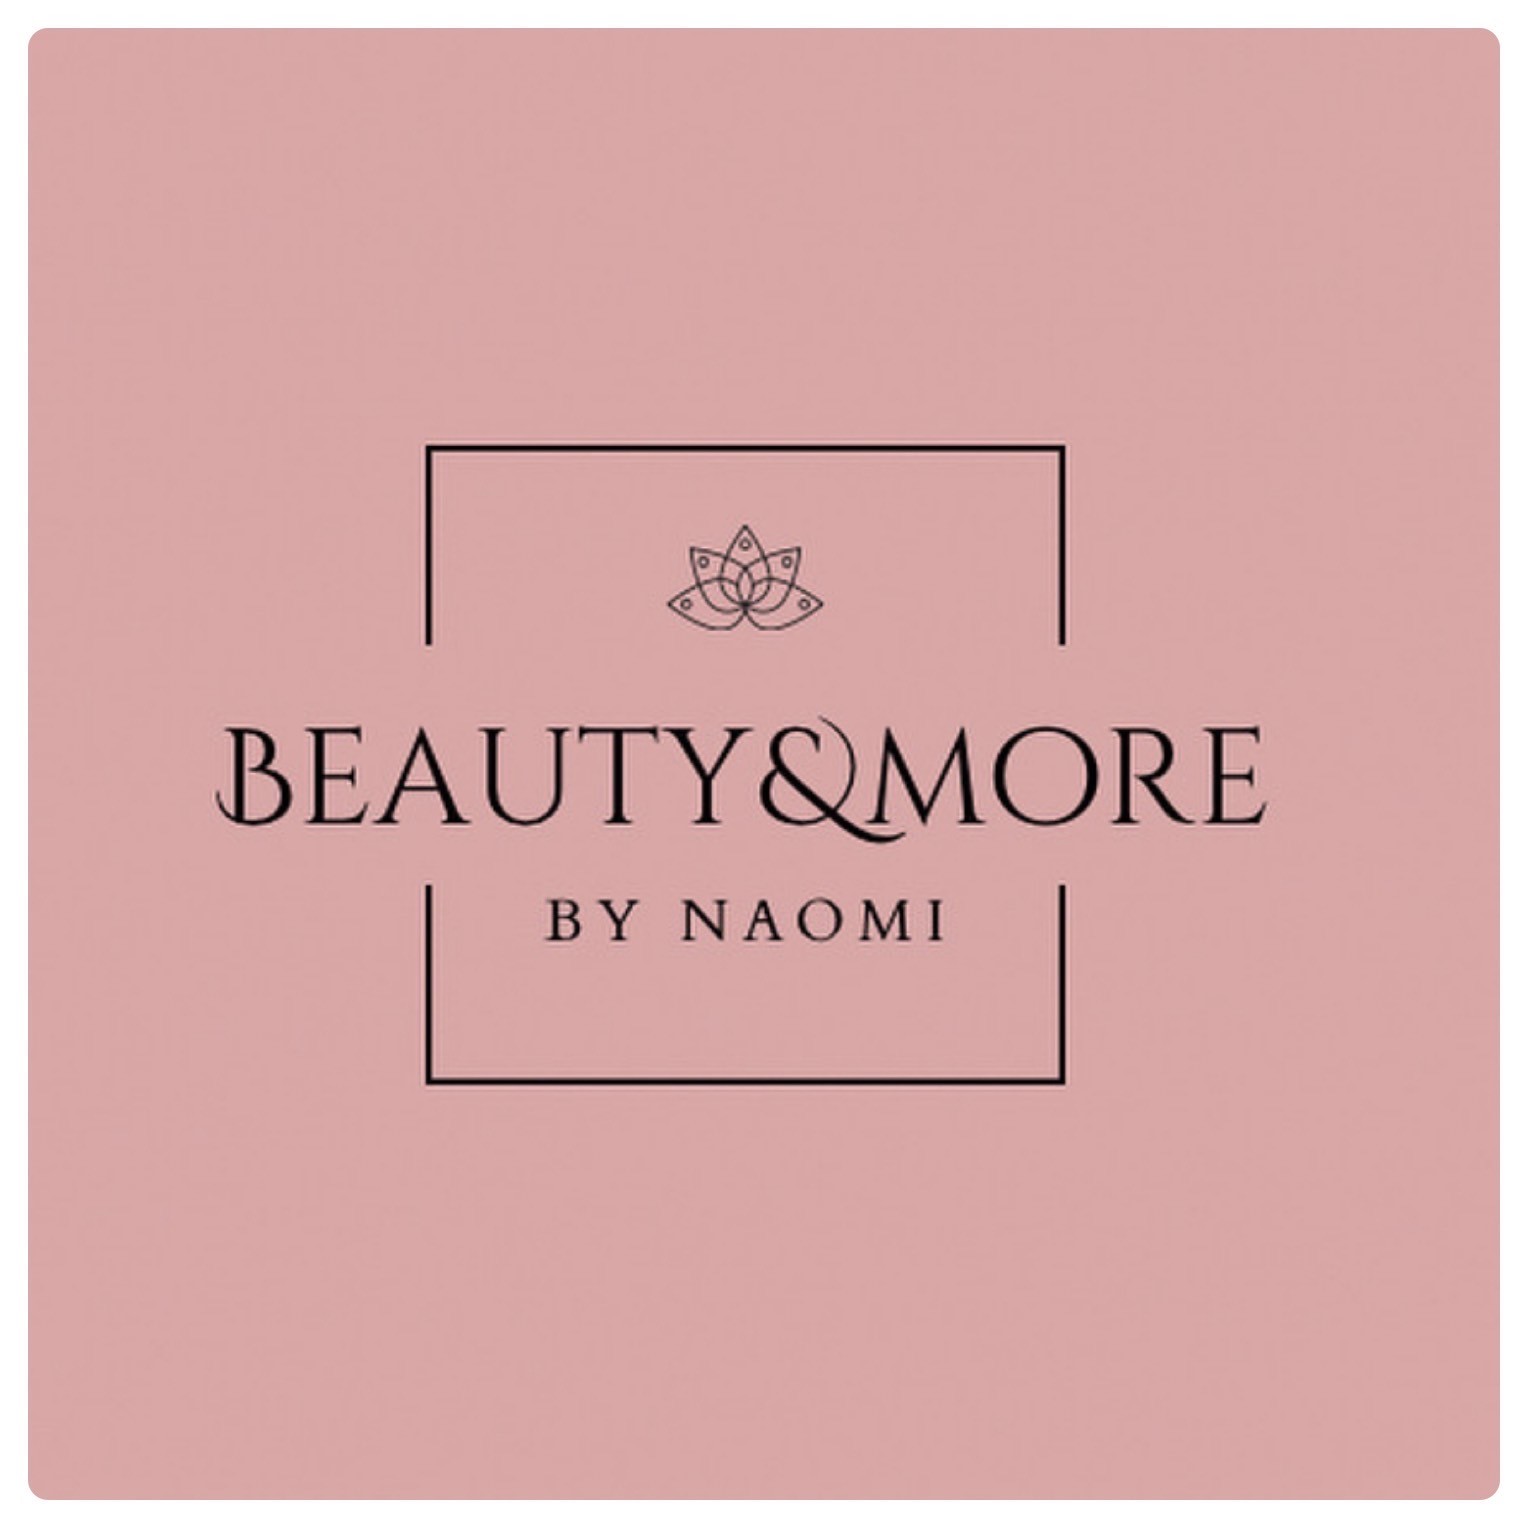 Beauty & More by Naomi